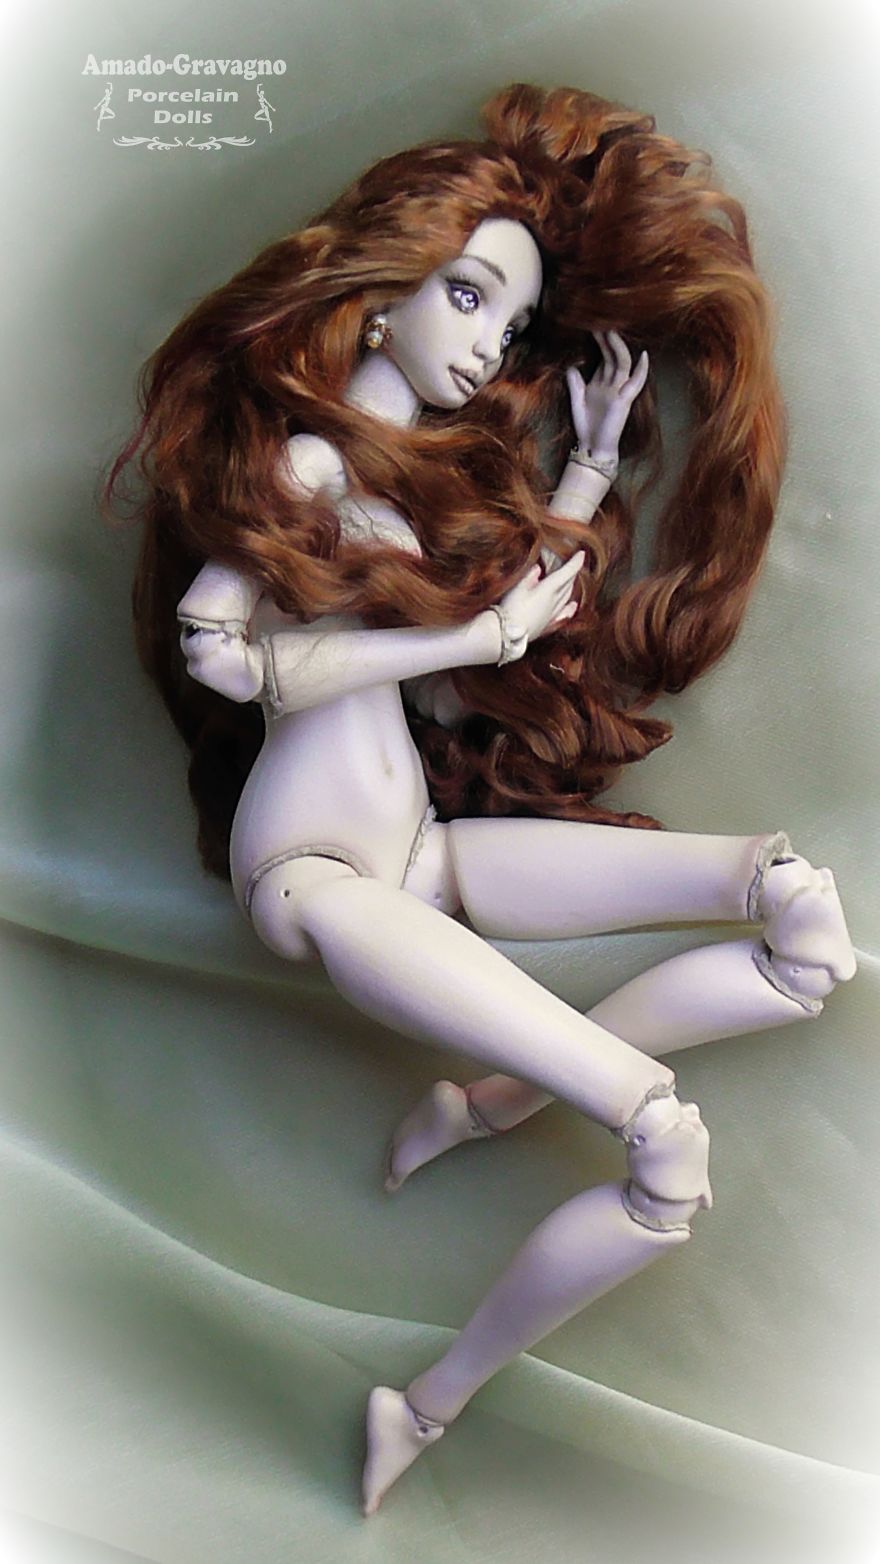 Captivating Fairytale Dolls Made In Porcelain That Can Fit In Your Hand And Will Stay In Your Heart Forever!